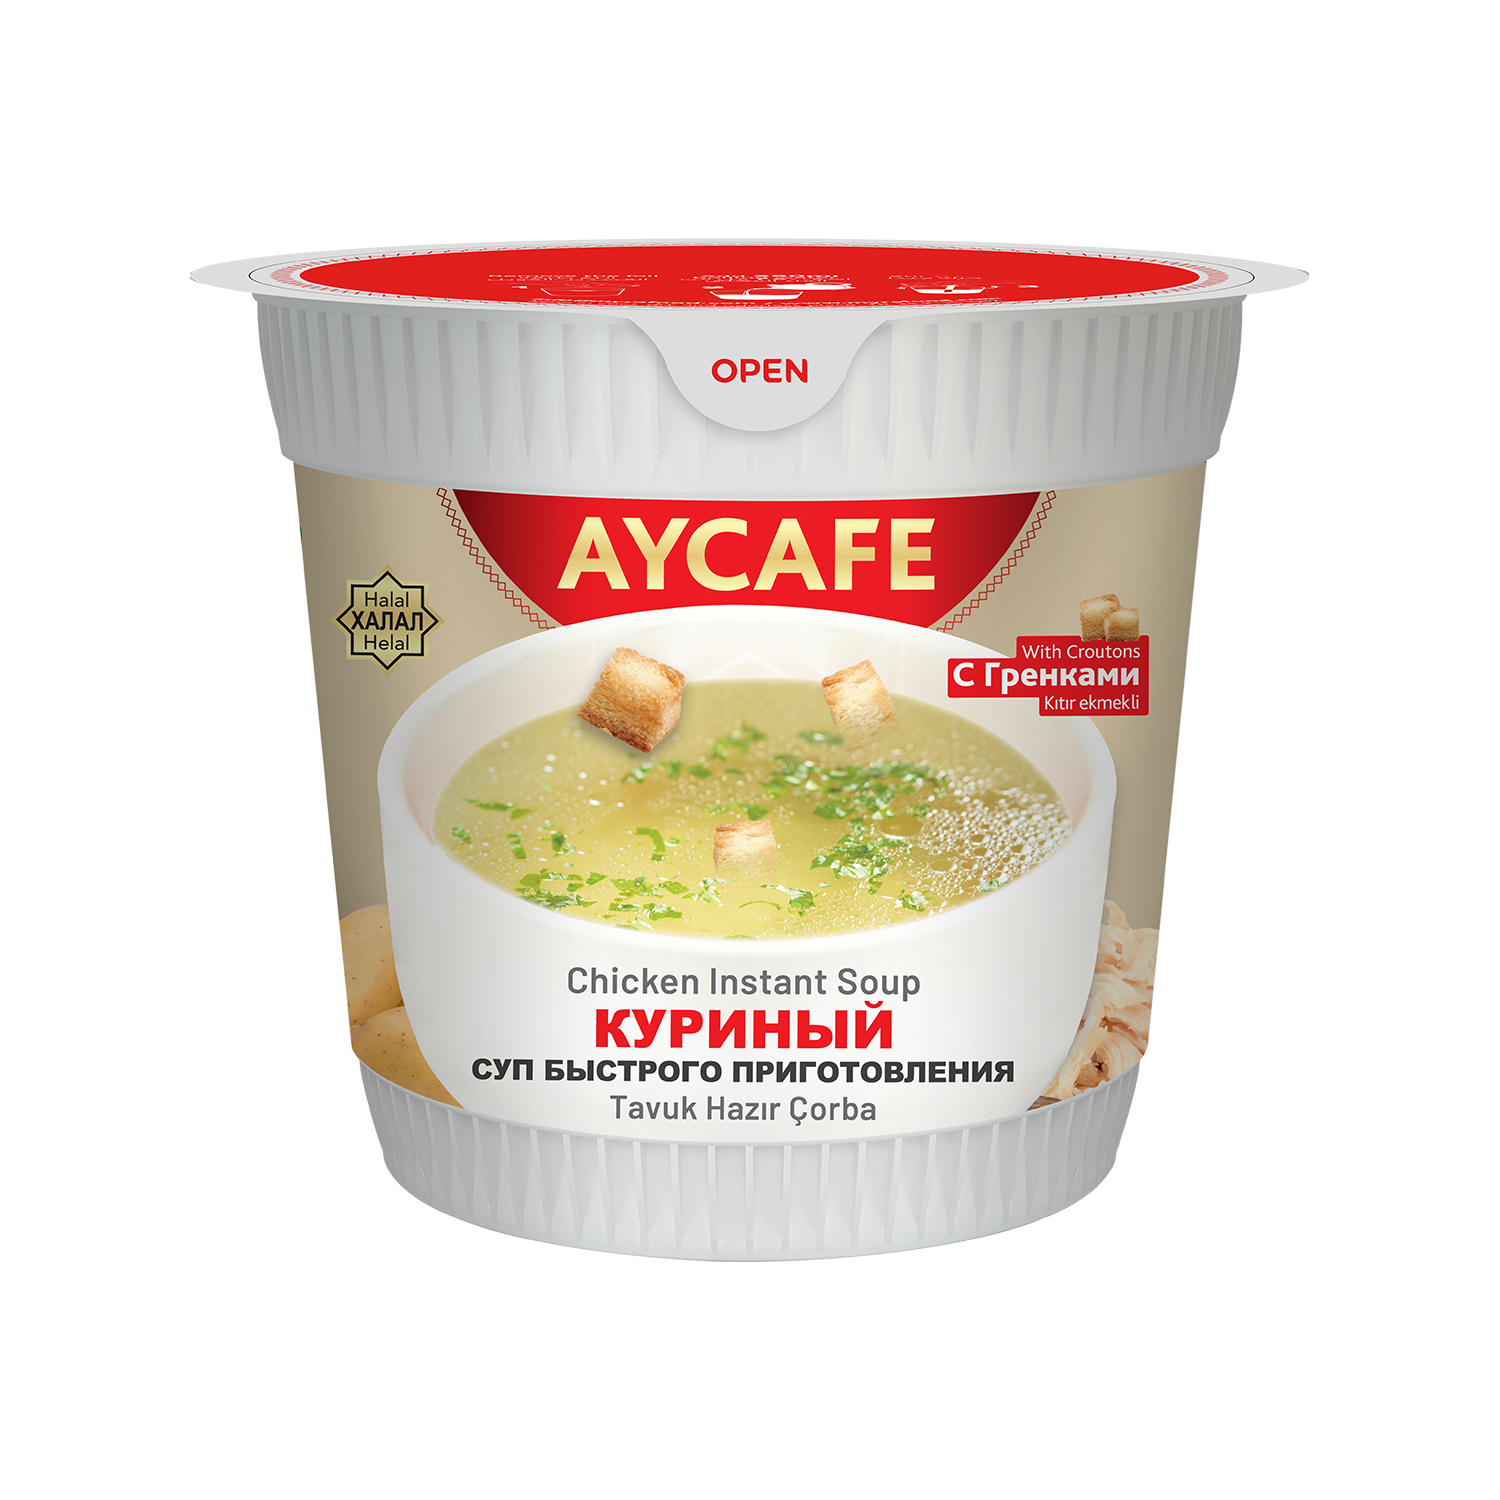 Aycafe Chicken Instant Soup In Cup